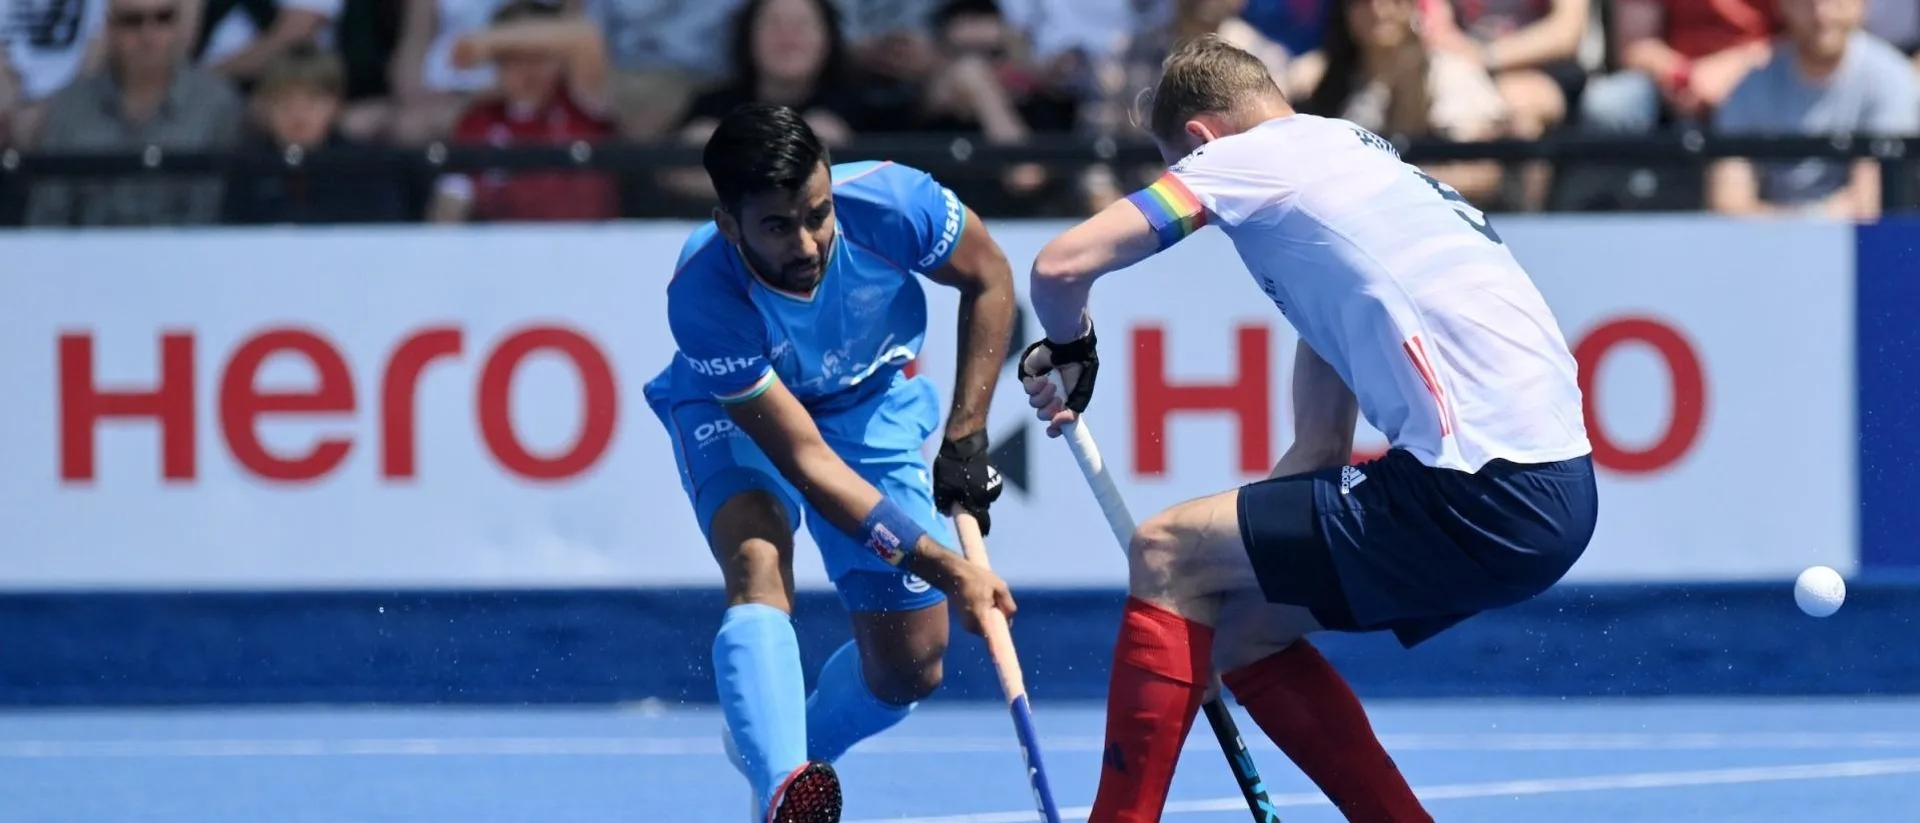 FIH Pro Hockey League | Great Britain beat India 4-2, go top of points table